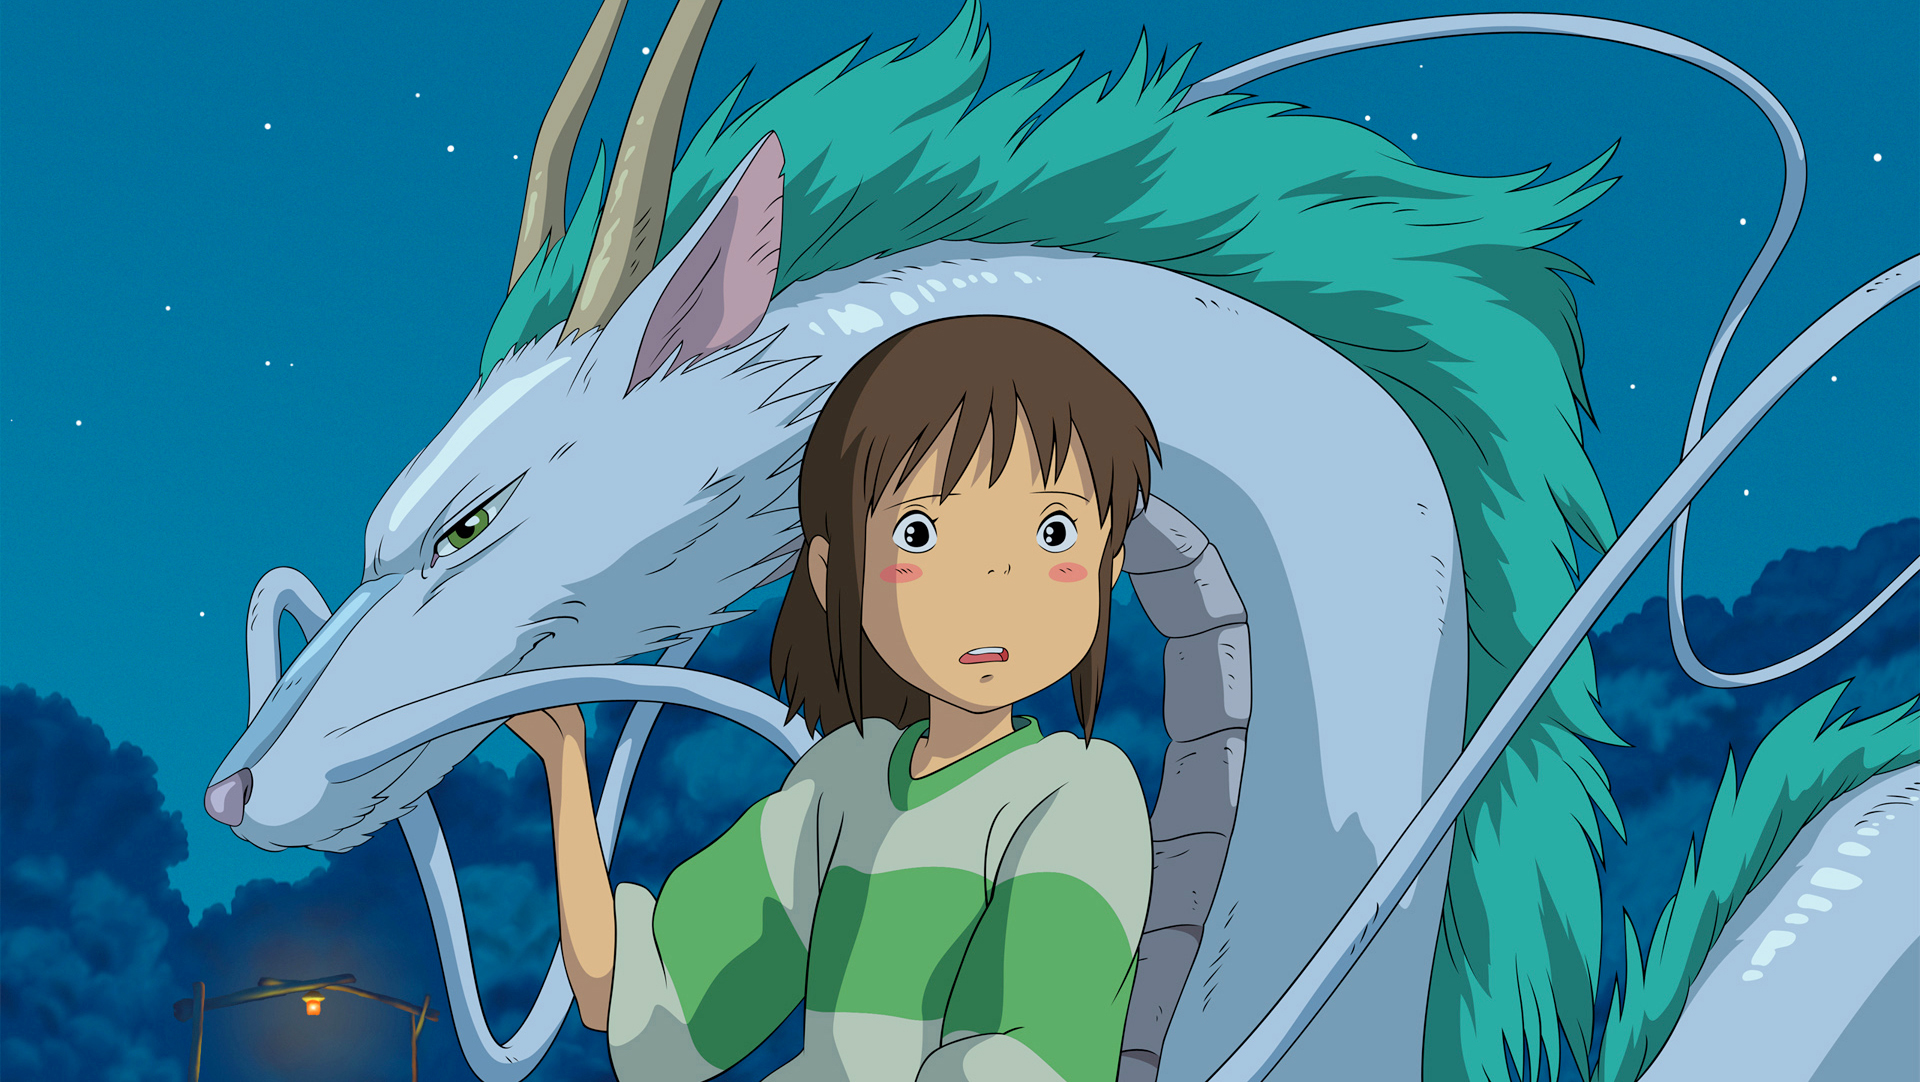 Chihiro and her new dragon friend. Photo source: HBO Max.